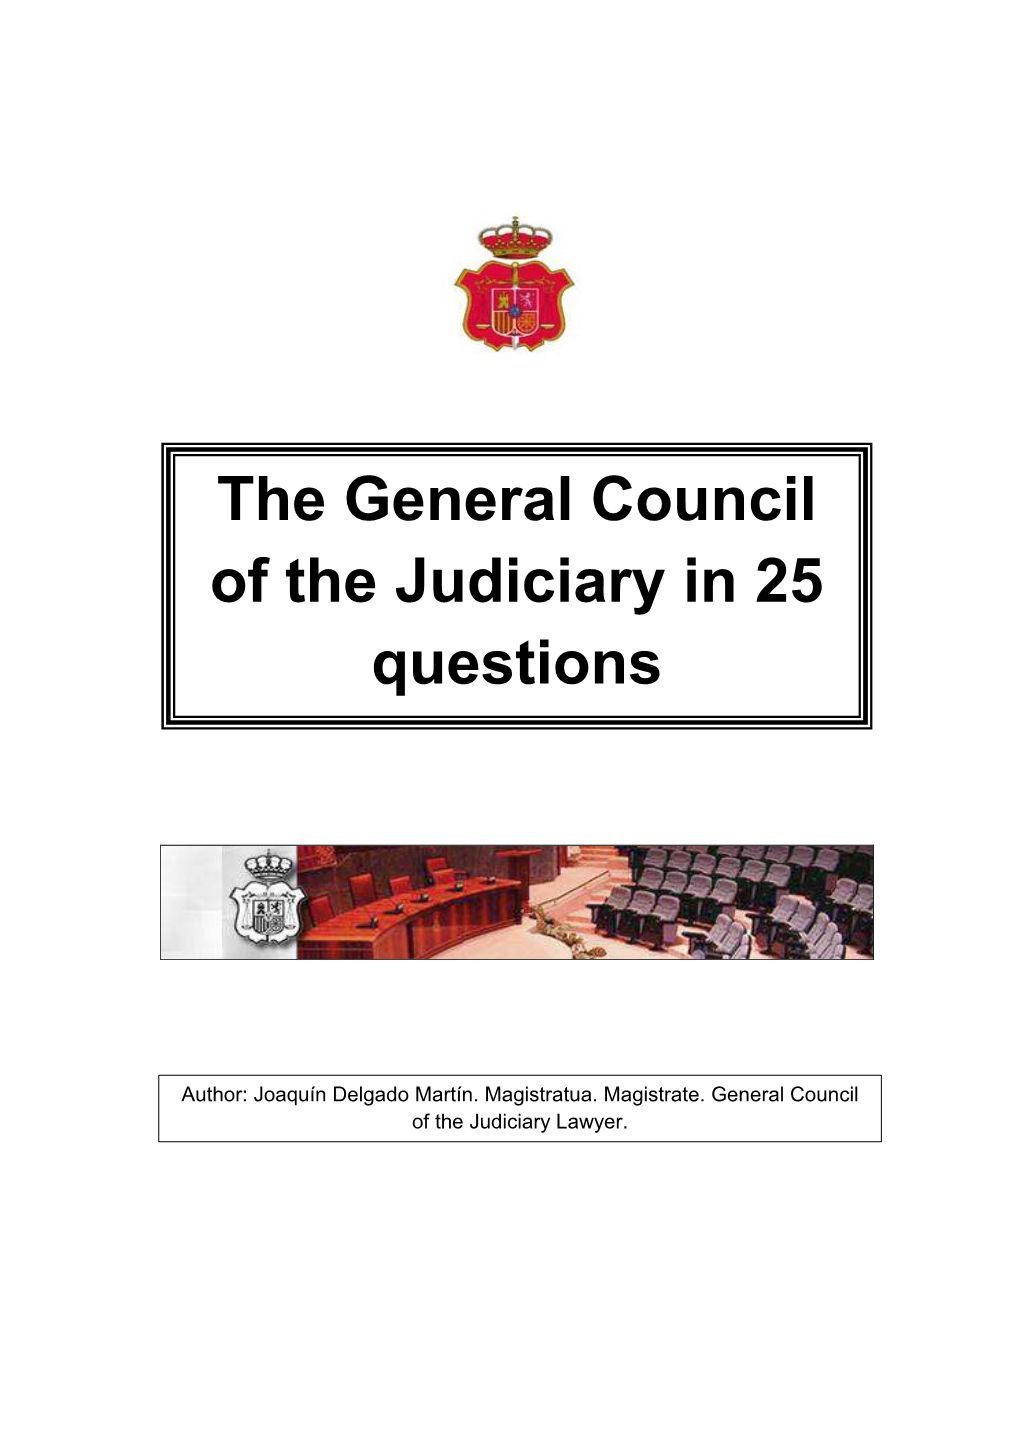 The General Council of the Judiciary in 25 Questions